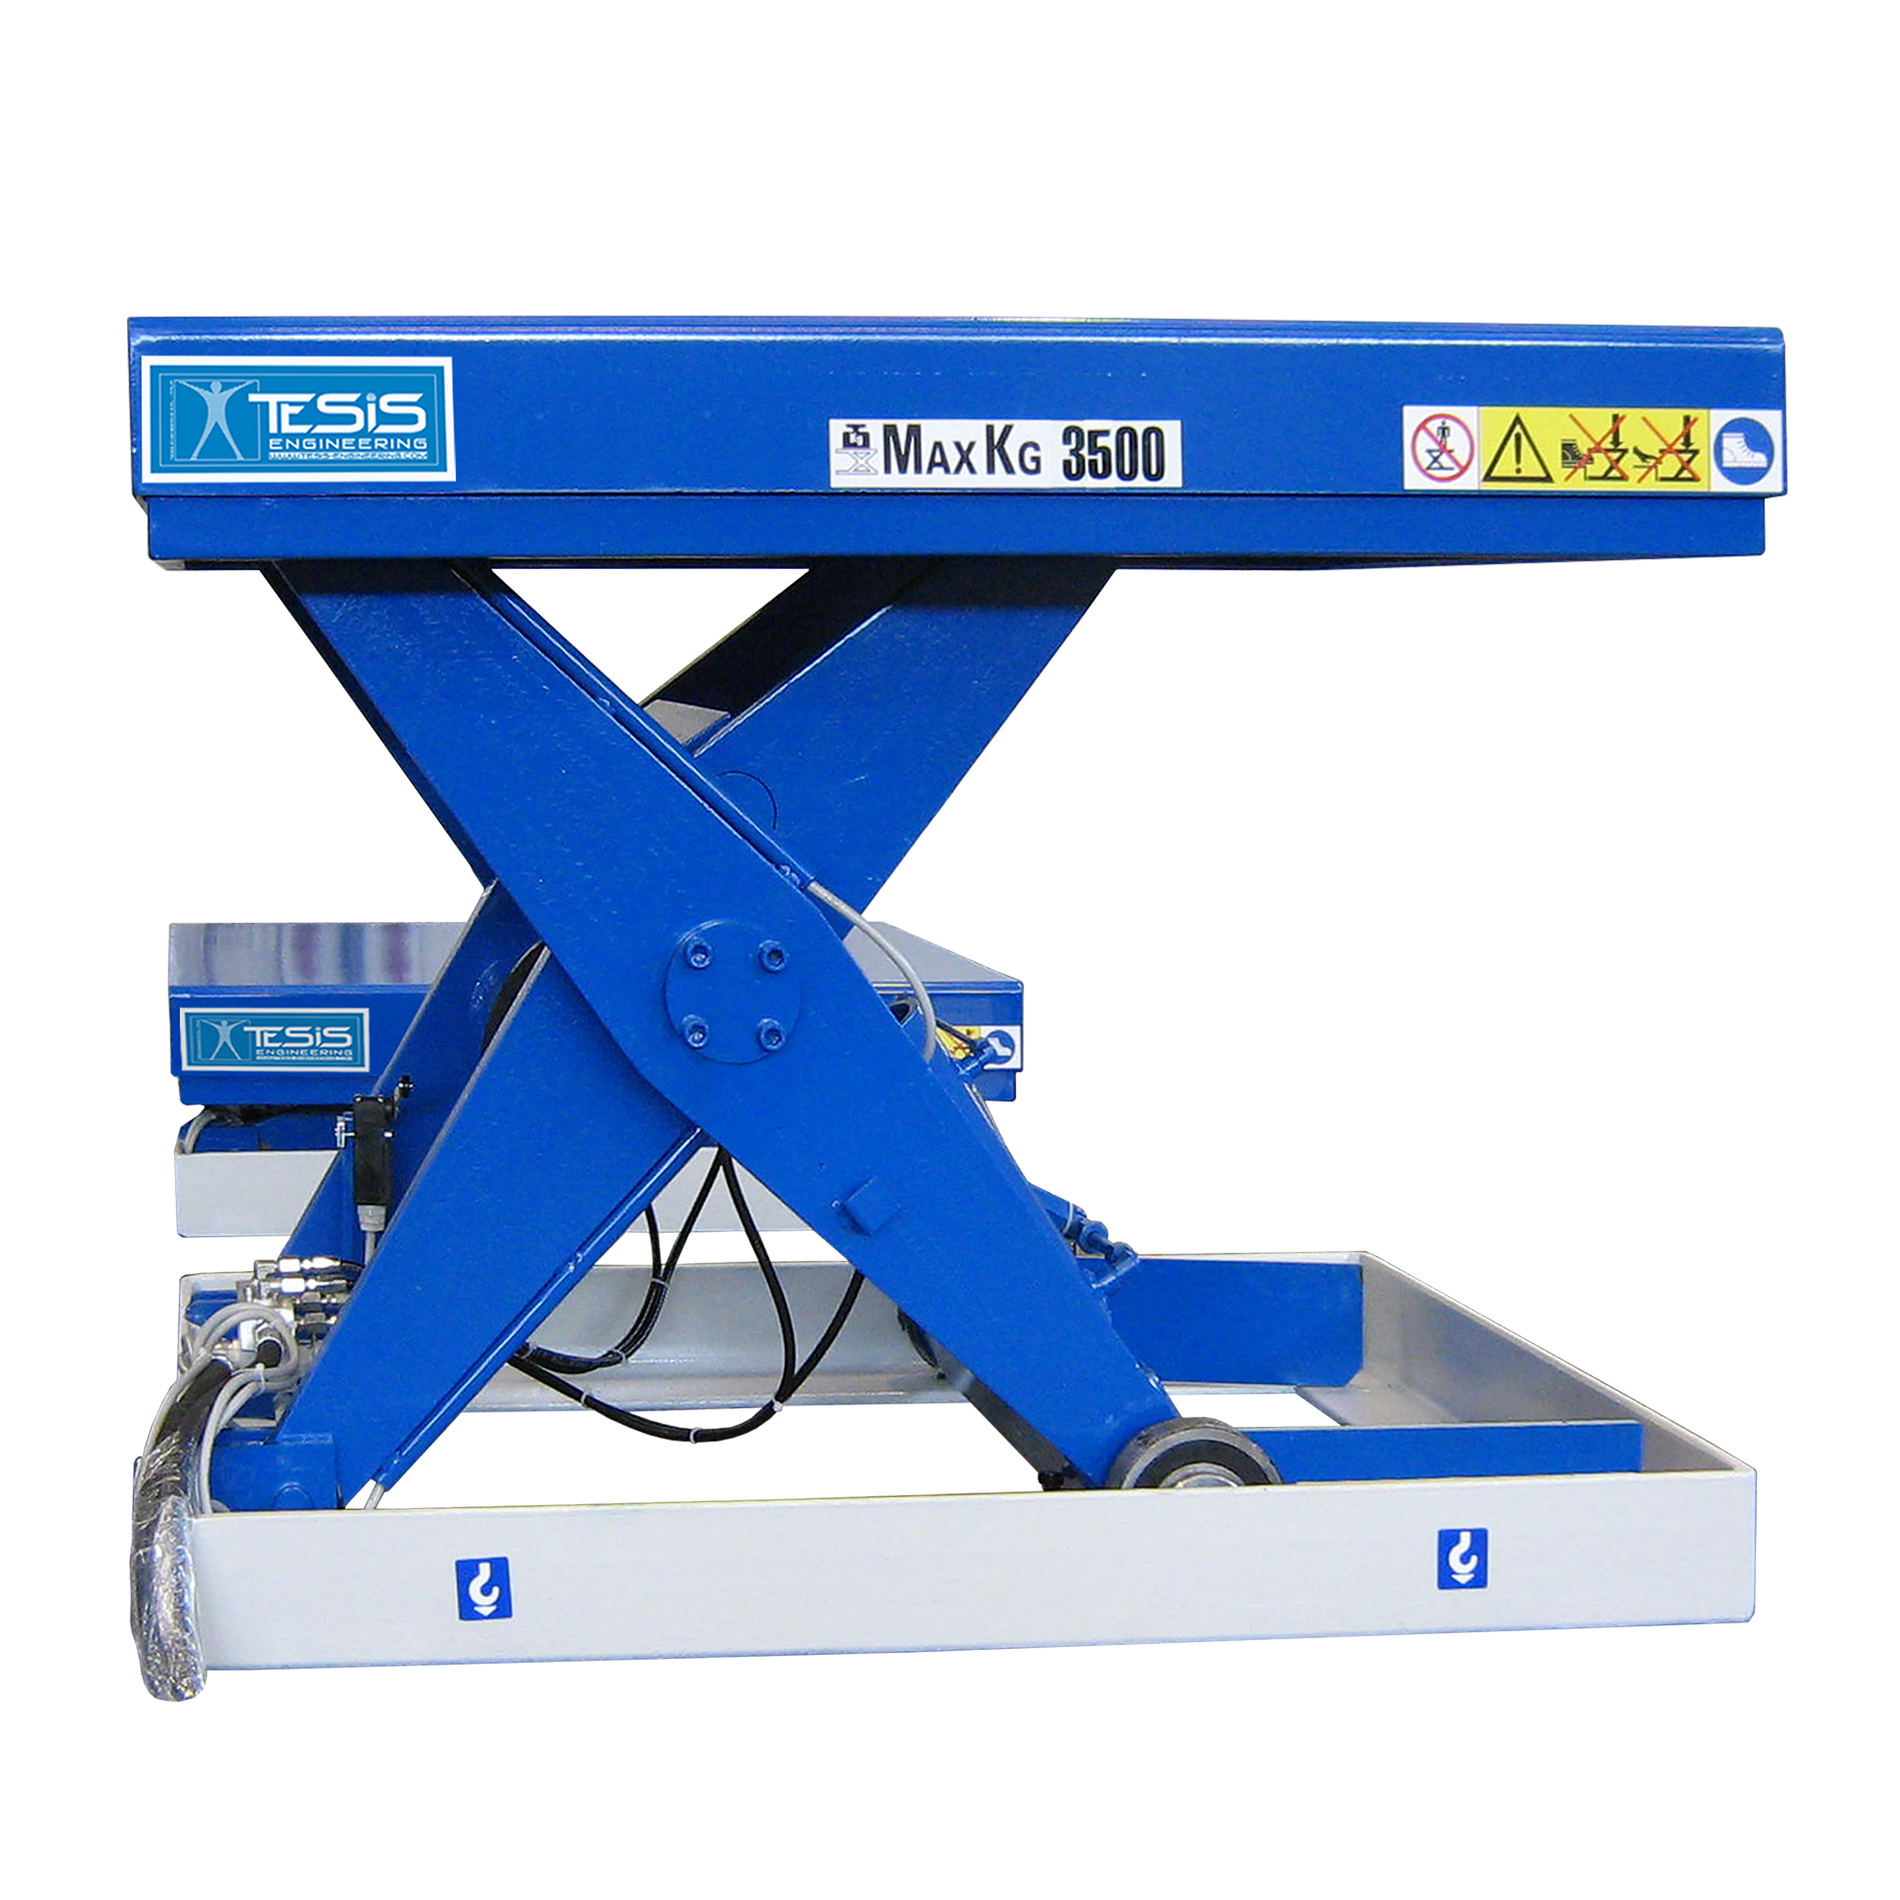 Heavy duty industrial lift table with greasing system - hydraulic lifting tables for intensive use - industrial scissor lifts - heavy duty scissor lifts